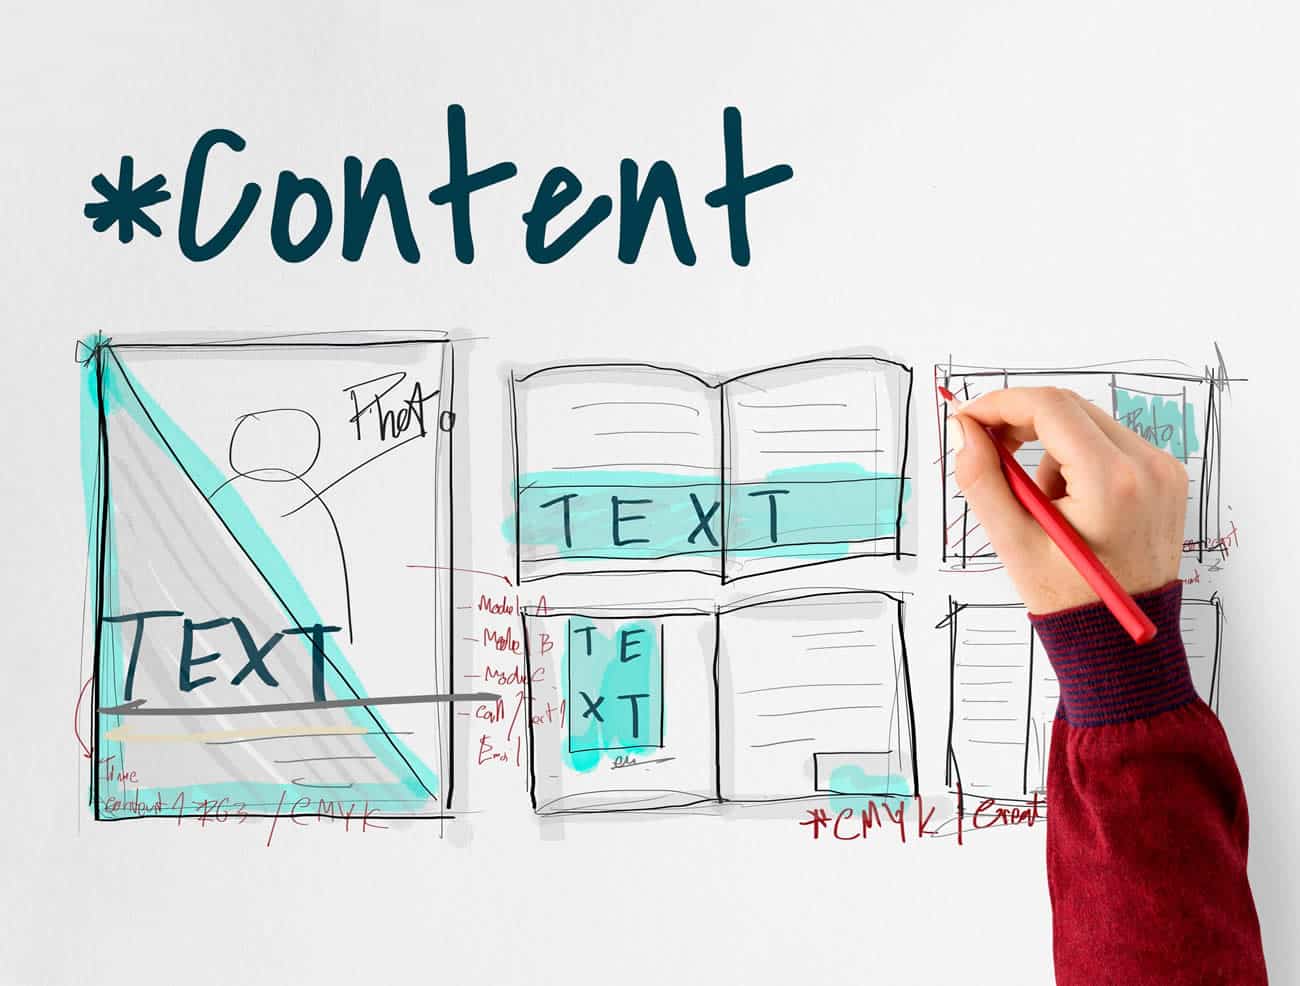 How Content Marketing and SEO Work Together